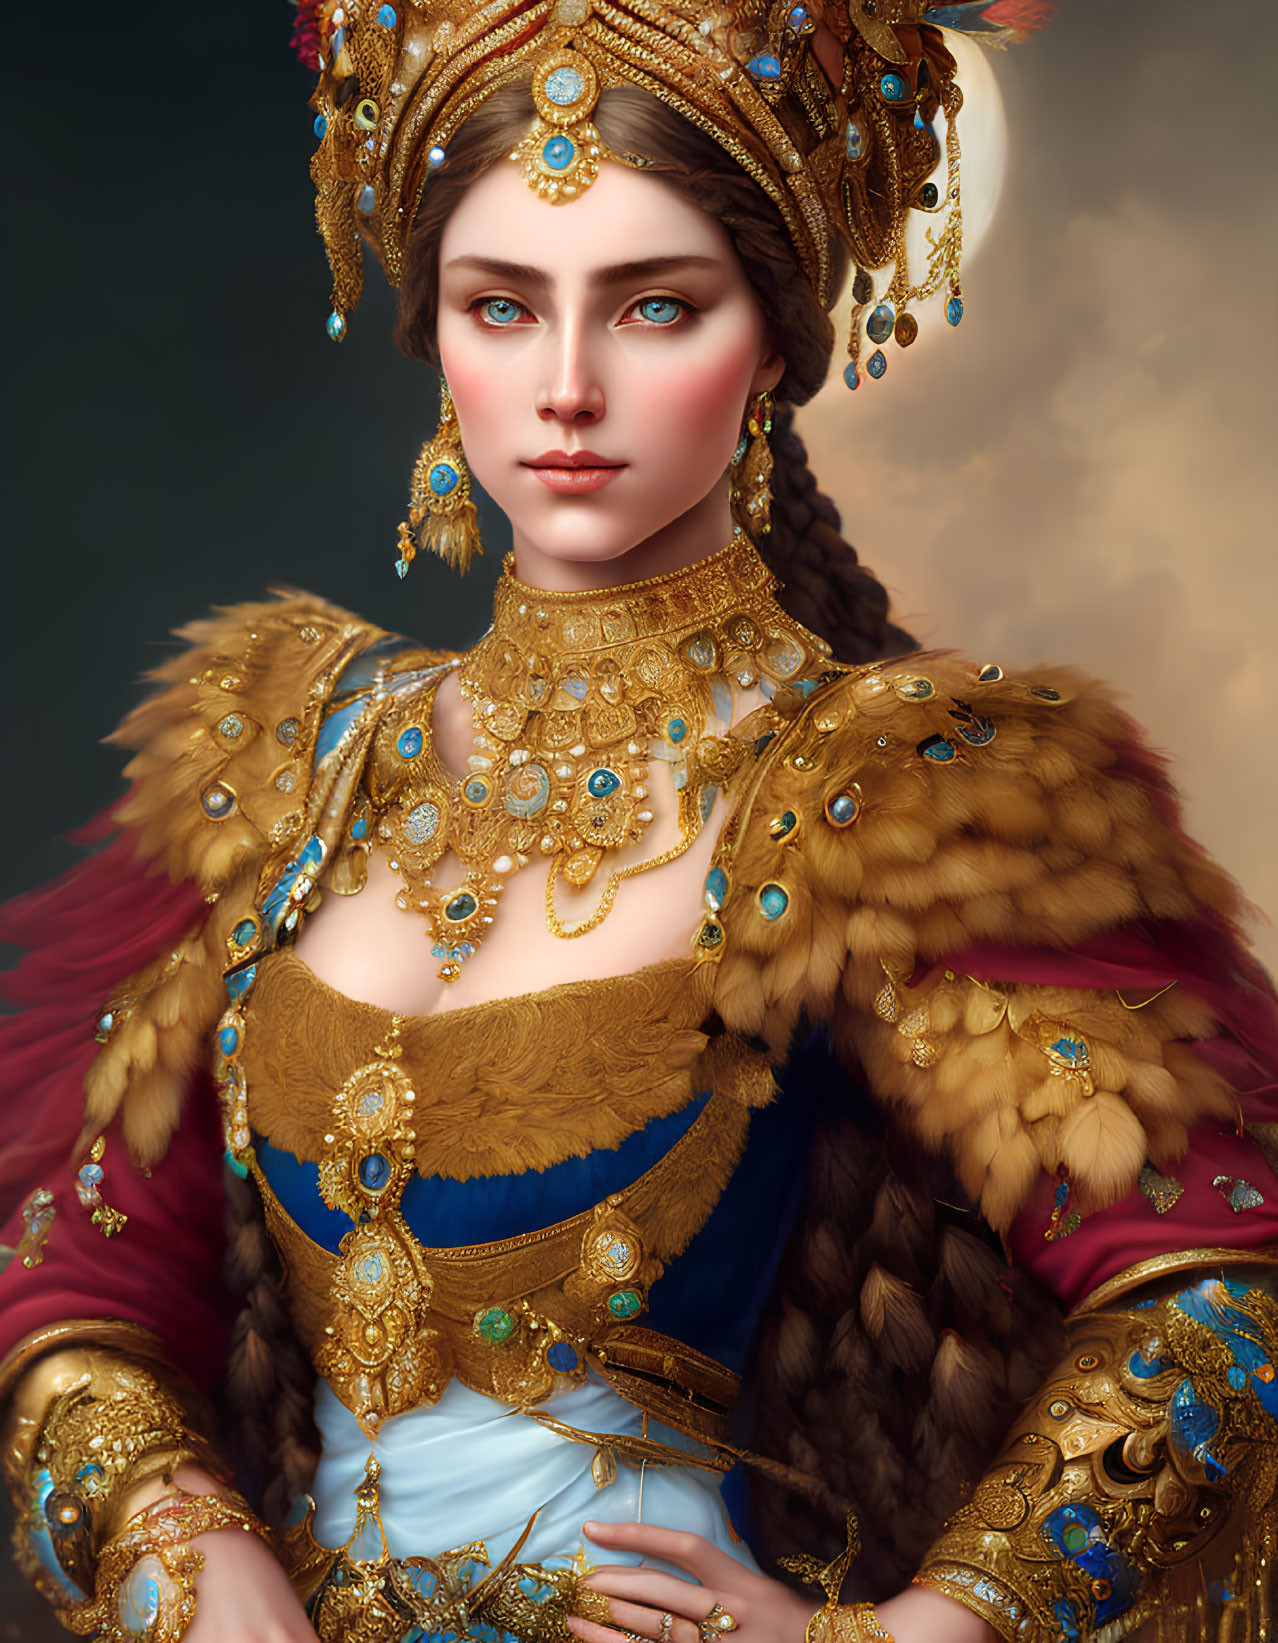 Regal woman with blue eyes in golden headdress and royal attire